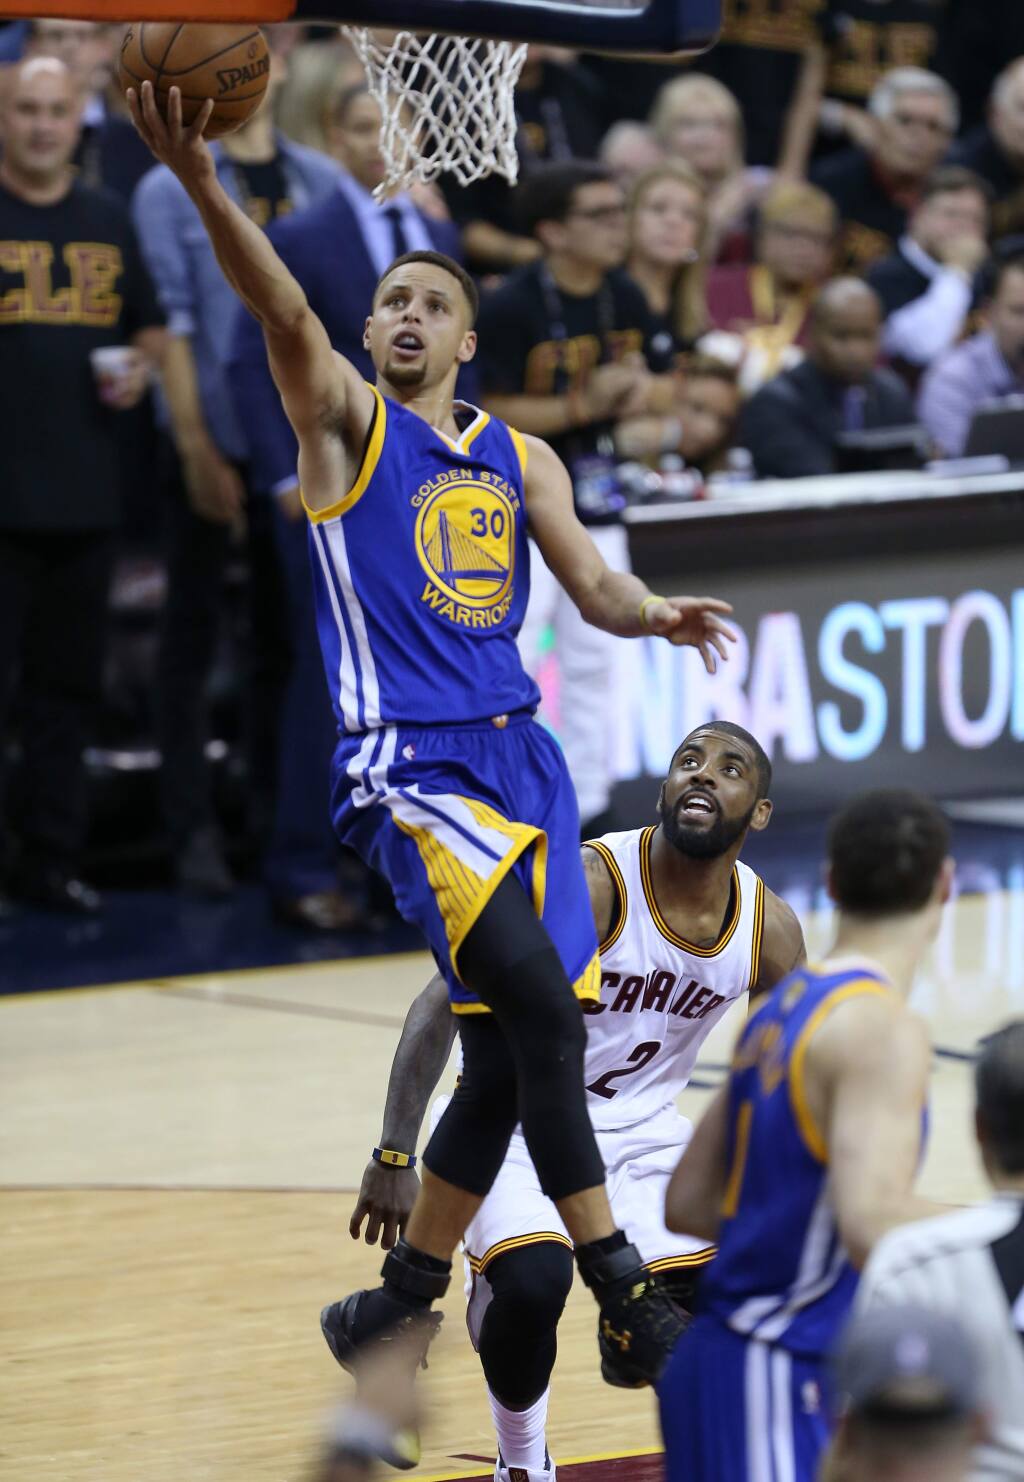 Warriors' big Game 7 question mark: How healthy is Andre Iguodala?